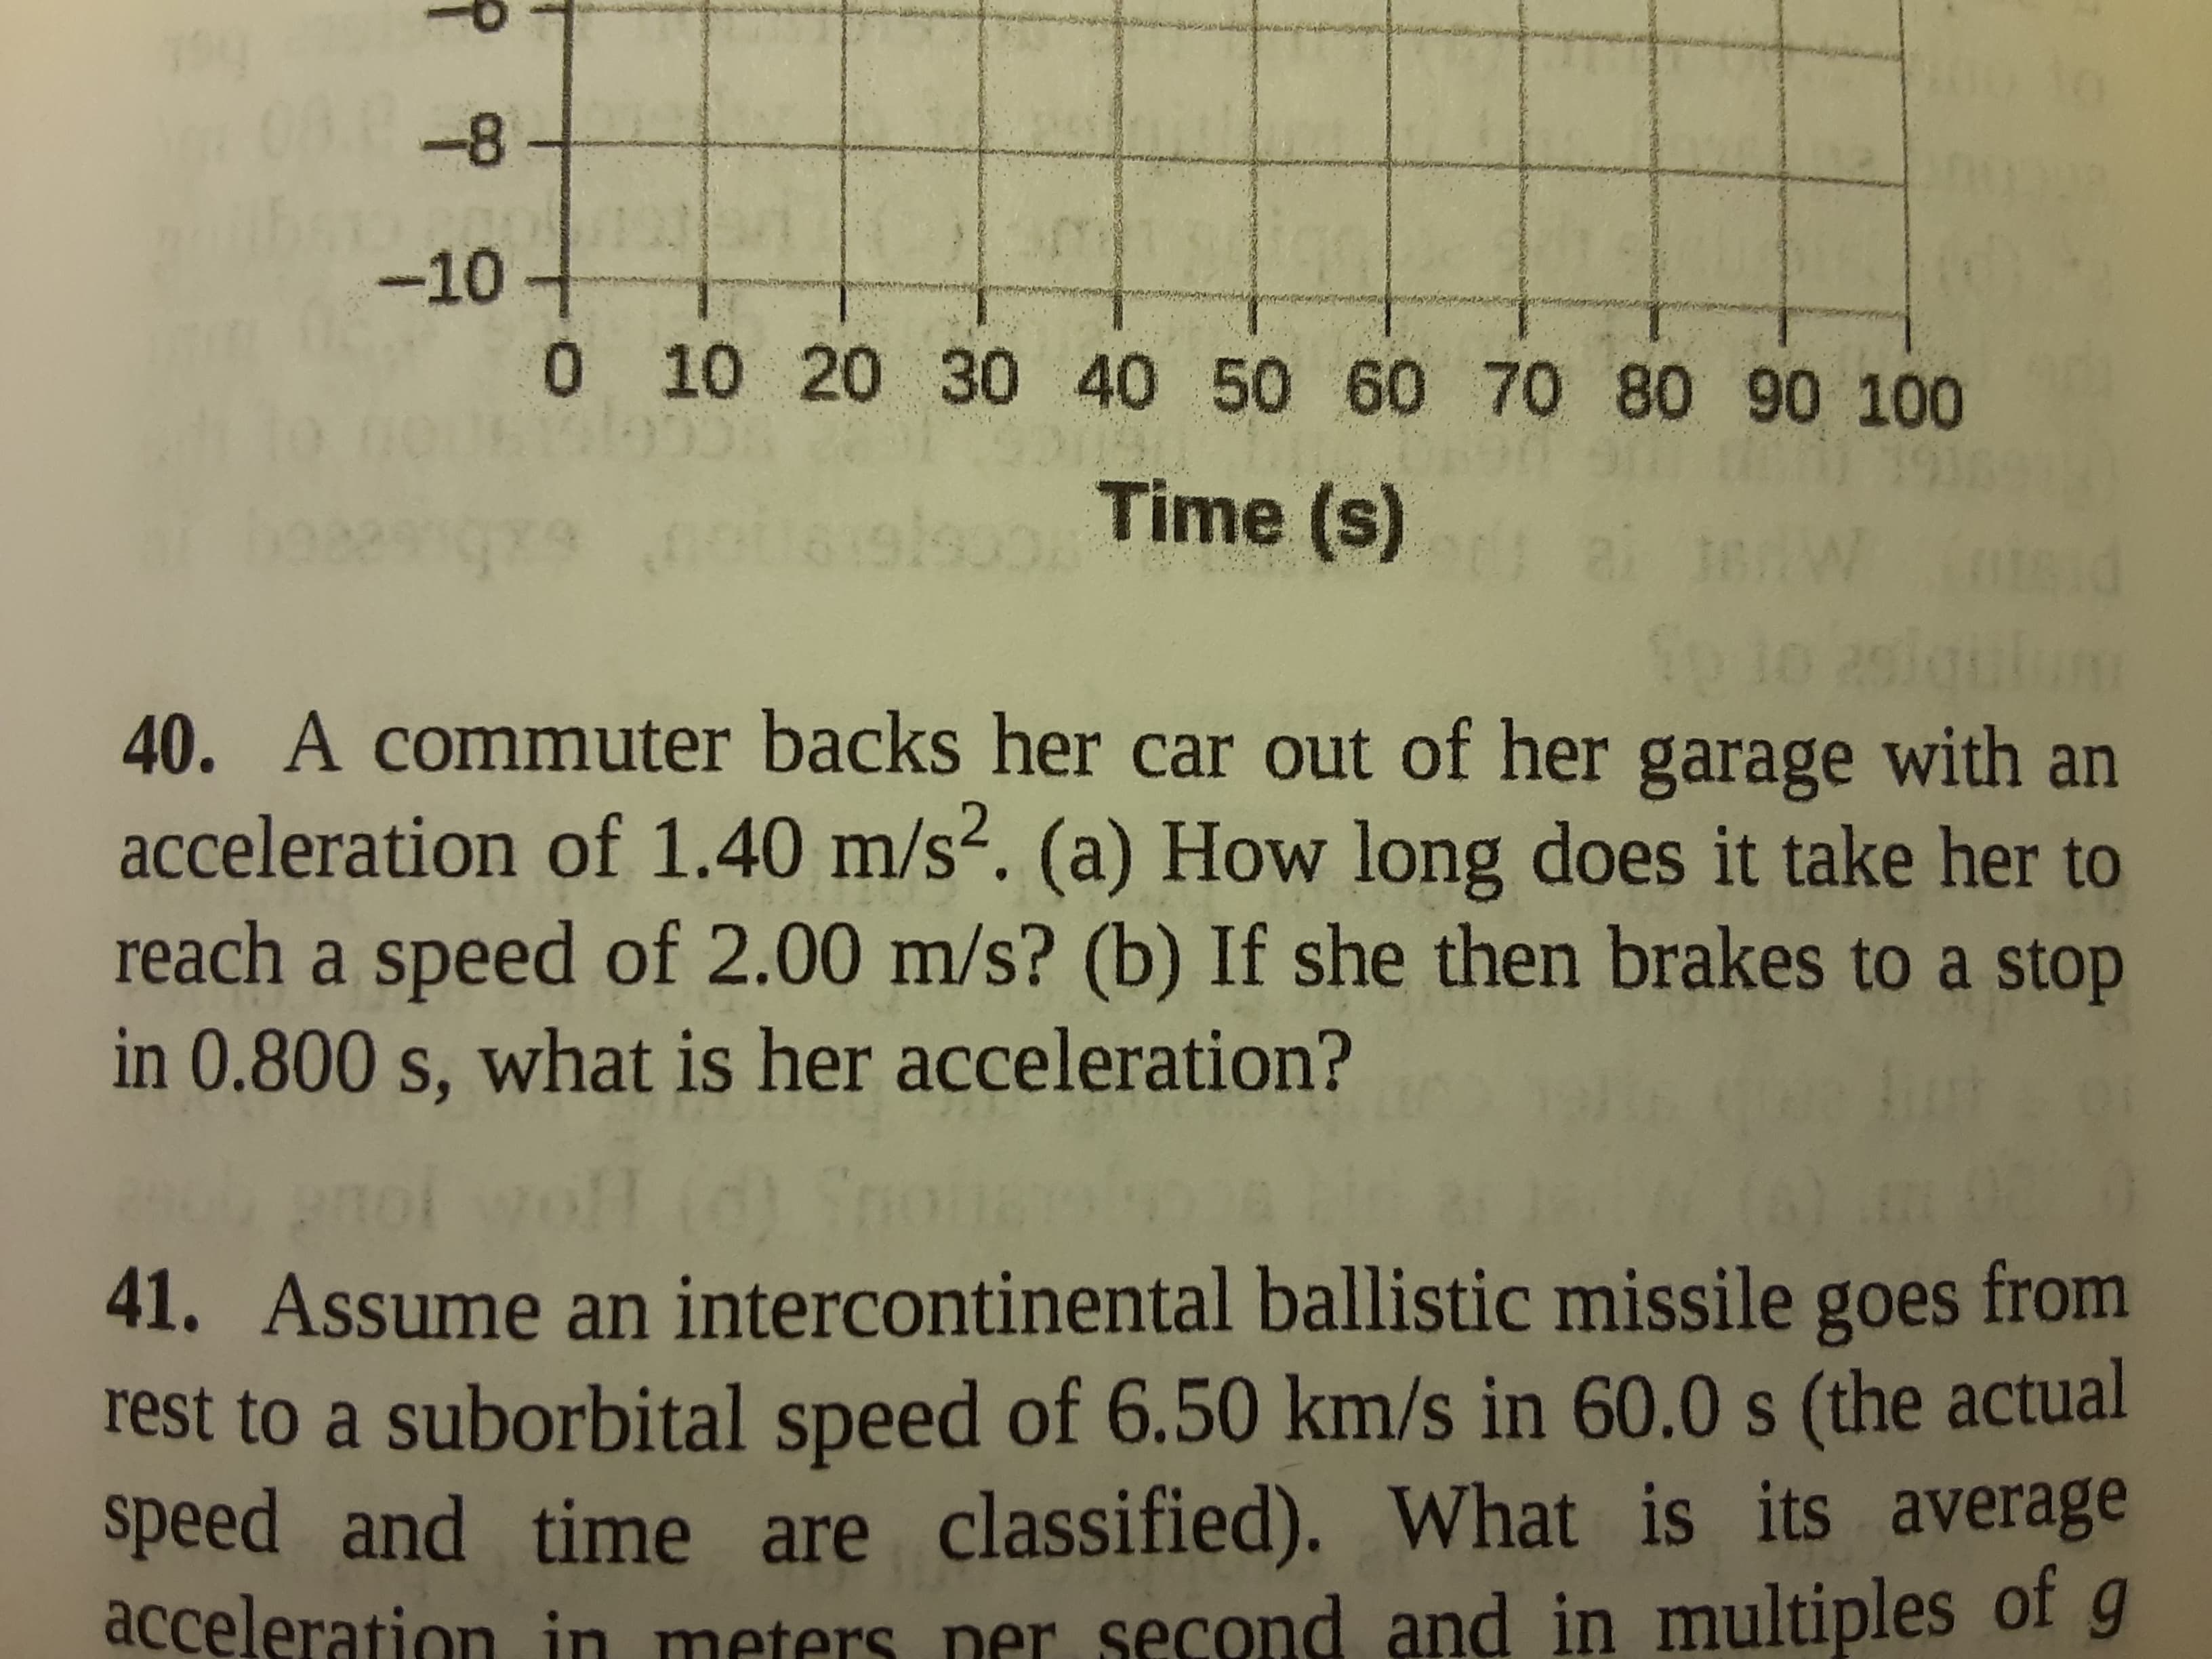 40. A commuter backs her car out of her garage with an
acceleration of 1.40 m/s2. (a) How long does it take her to
reach a speed of 2.00 m/s? (b) If she then brakes to a stop
in 0.800 s, what is her acceleration?
